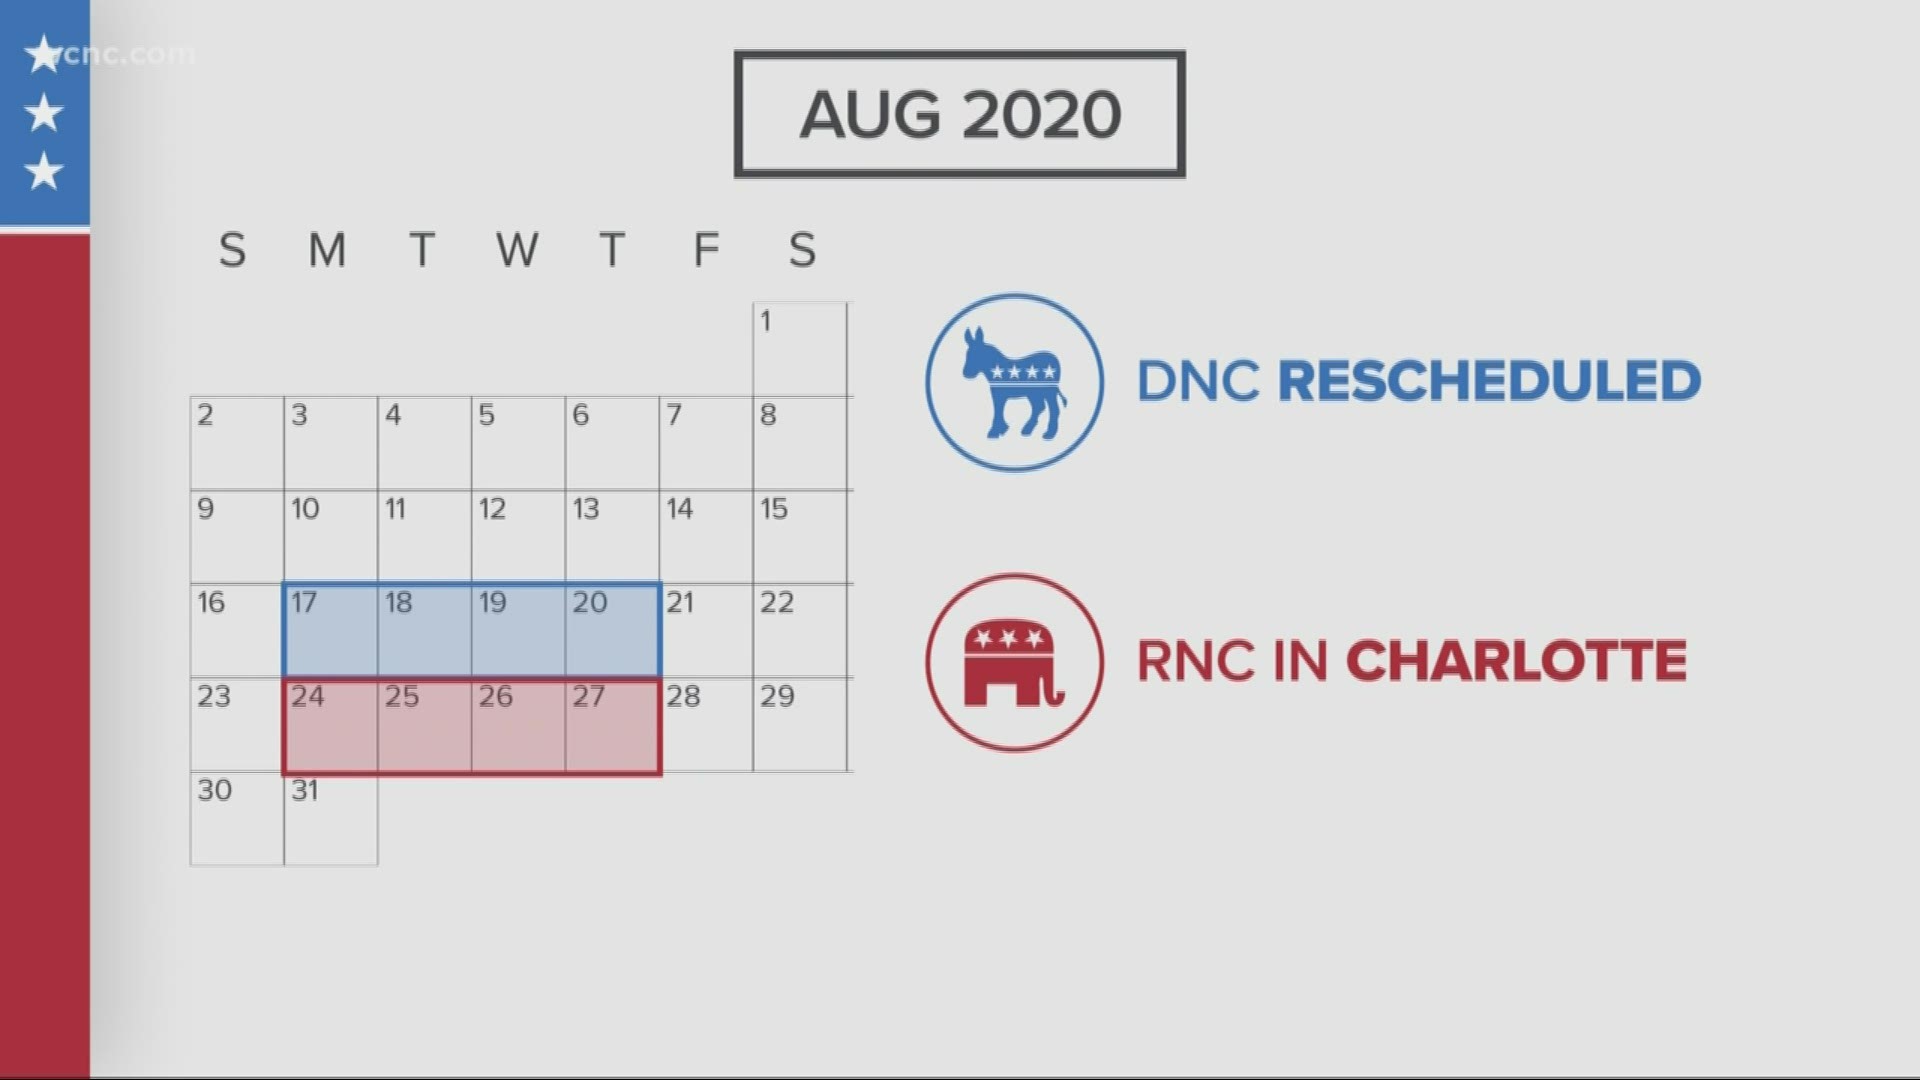 The DNC is being rescheduled to August because of the coronavirus. Thus far, the Republican National Convention remains on schedule in Charlotte.